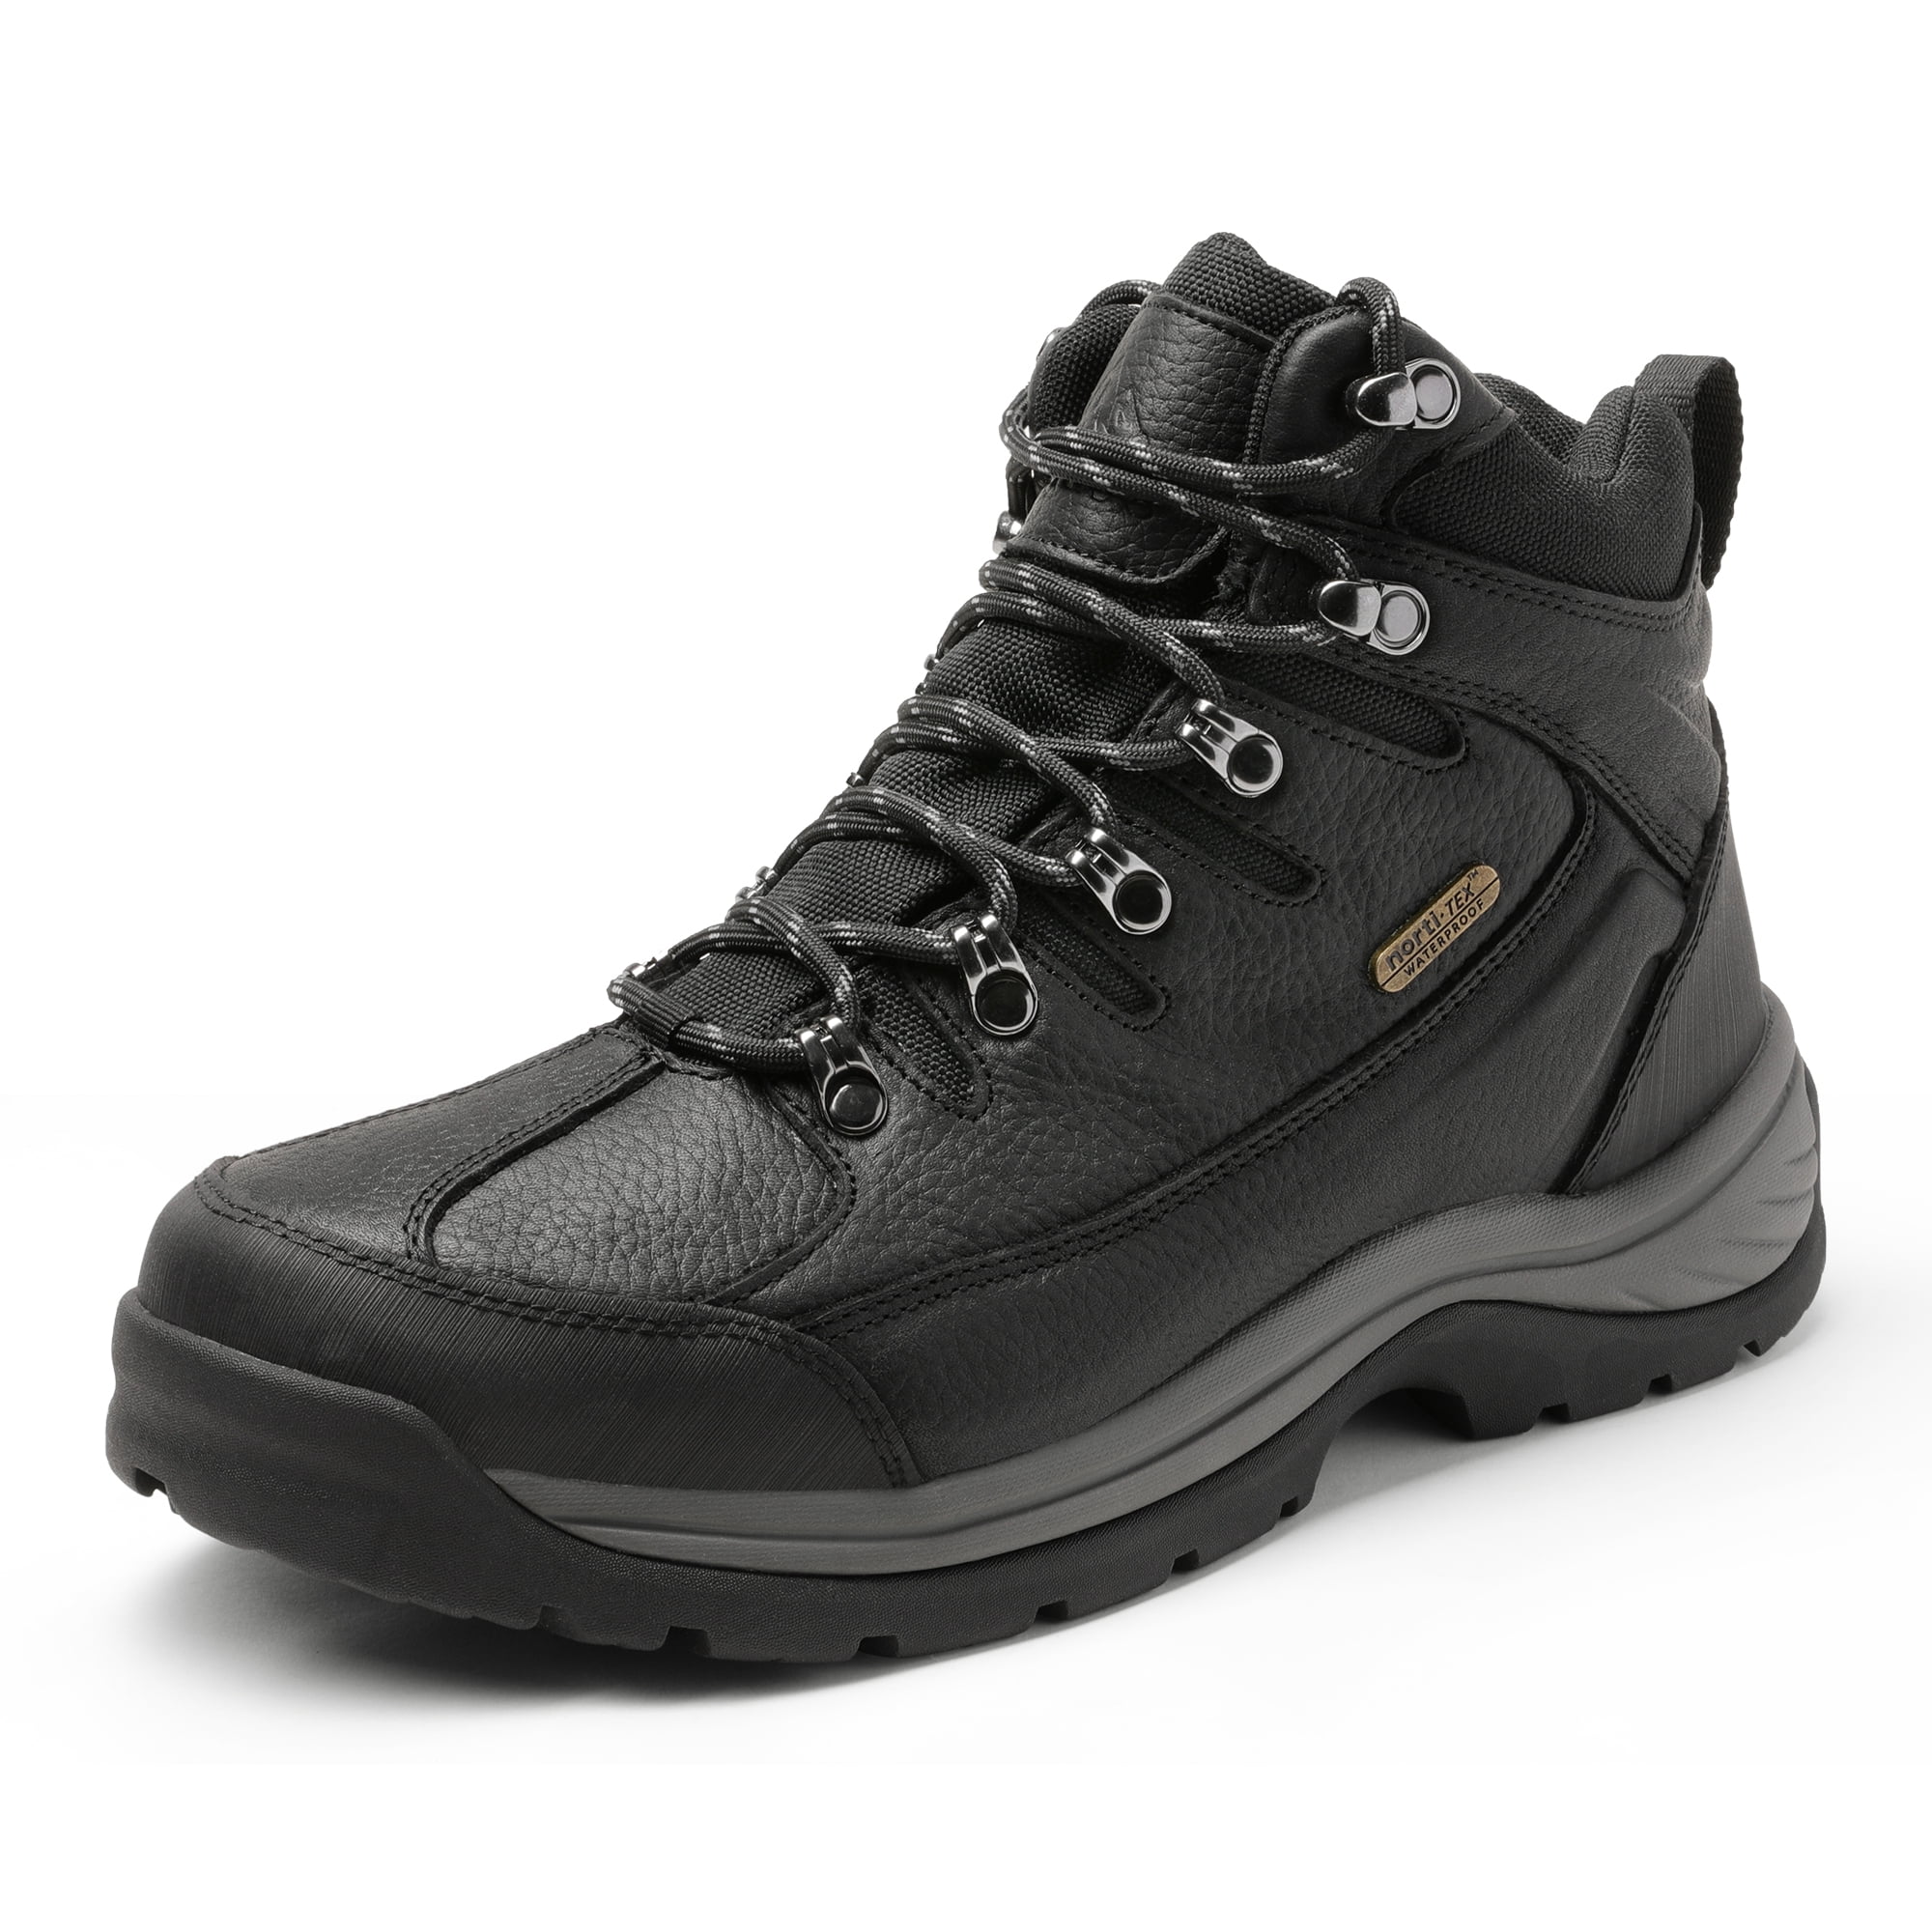 MENS DICKIES CANTON LEATHER SAFETY STEEL TOE CAP MIDSOLE WORK BOOTS ANKLE HIKER 